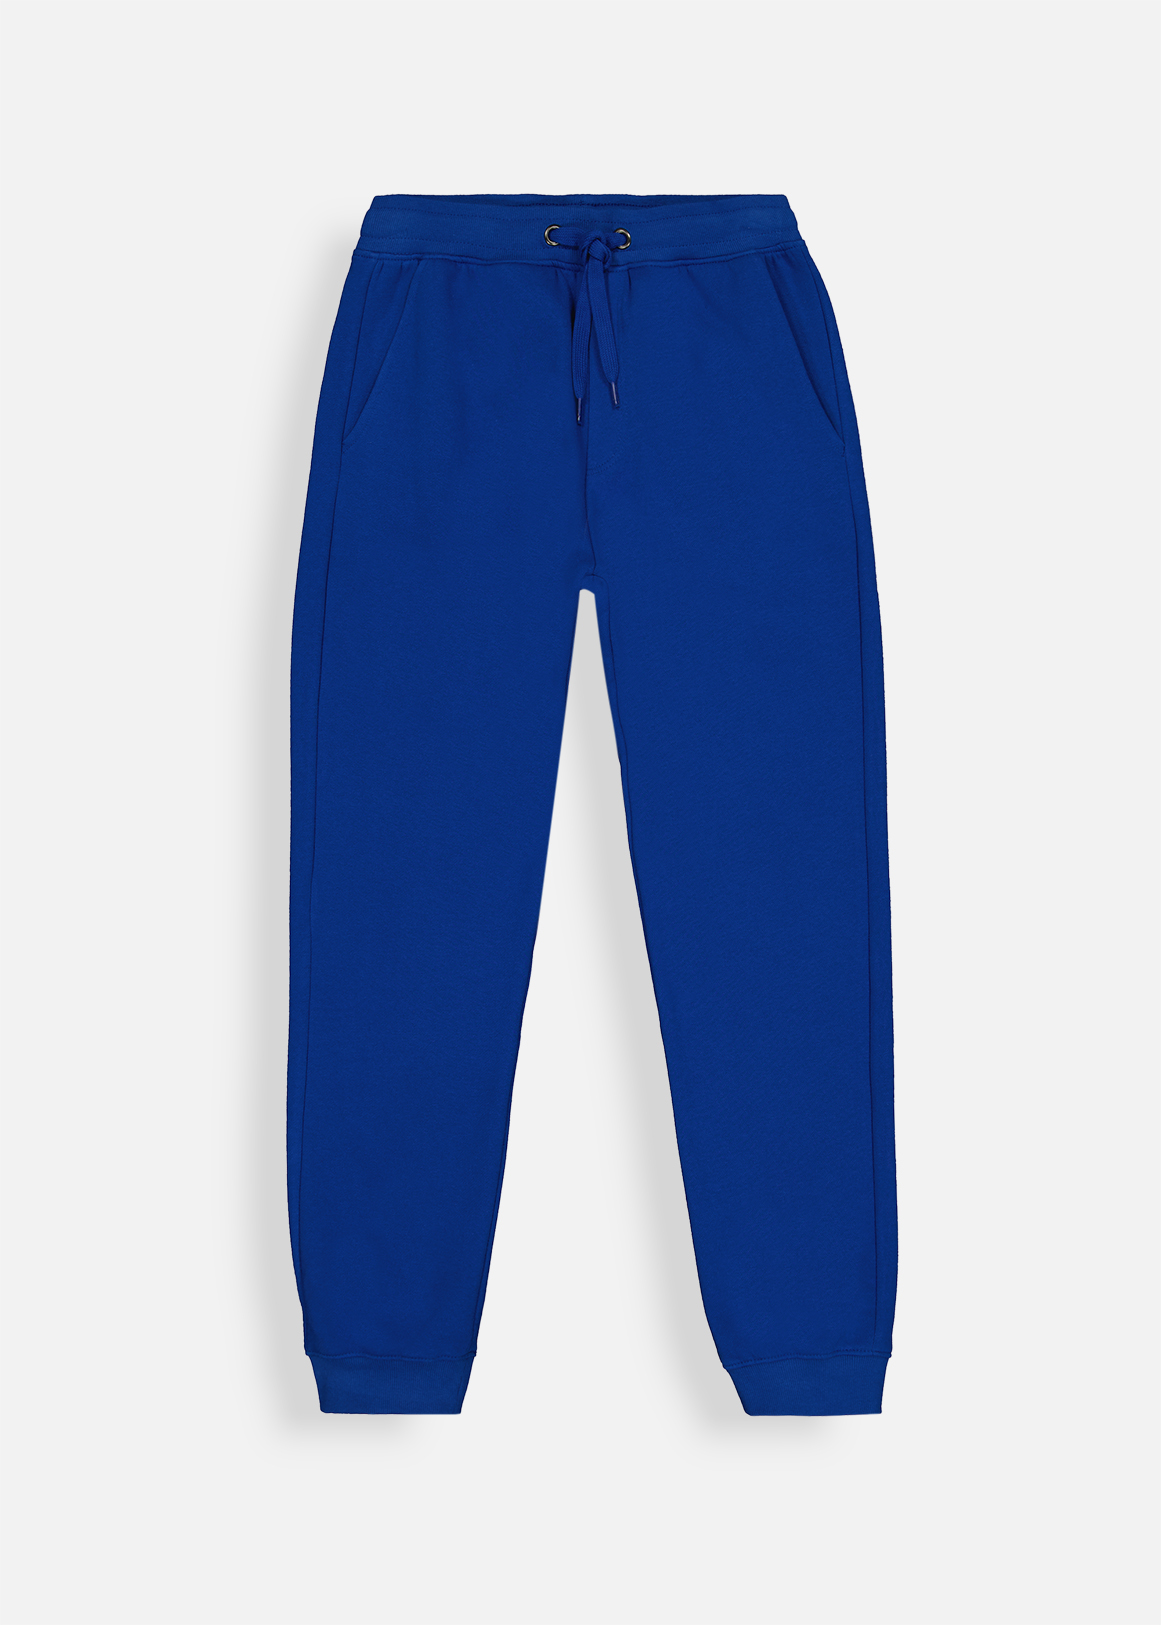 Buy Men's Trackpants & Tights Online in SA